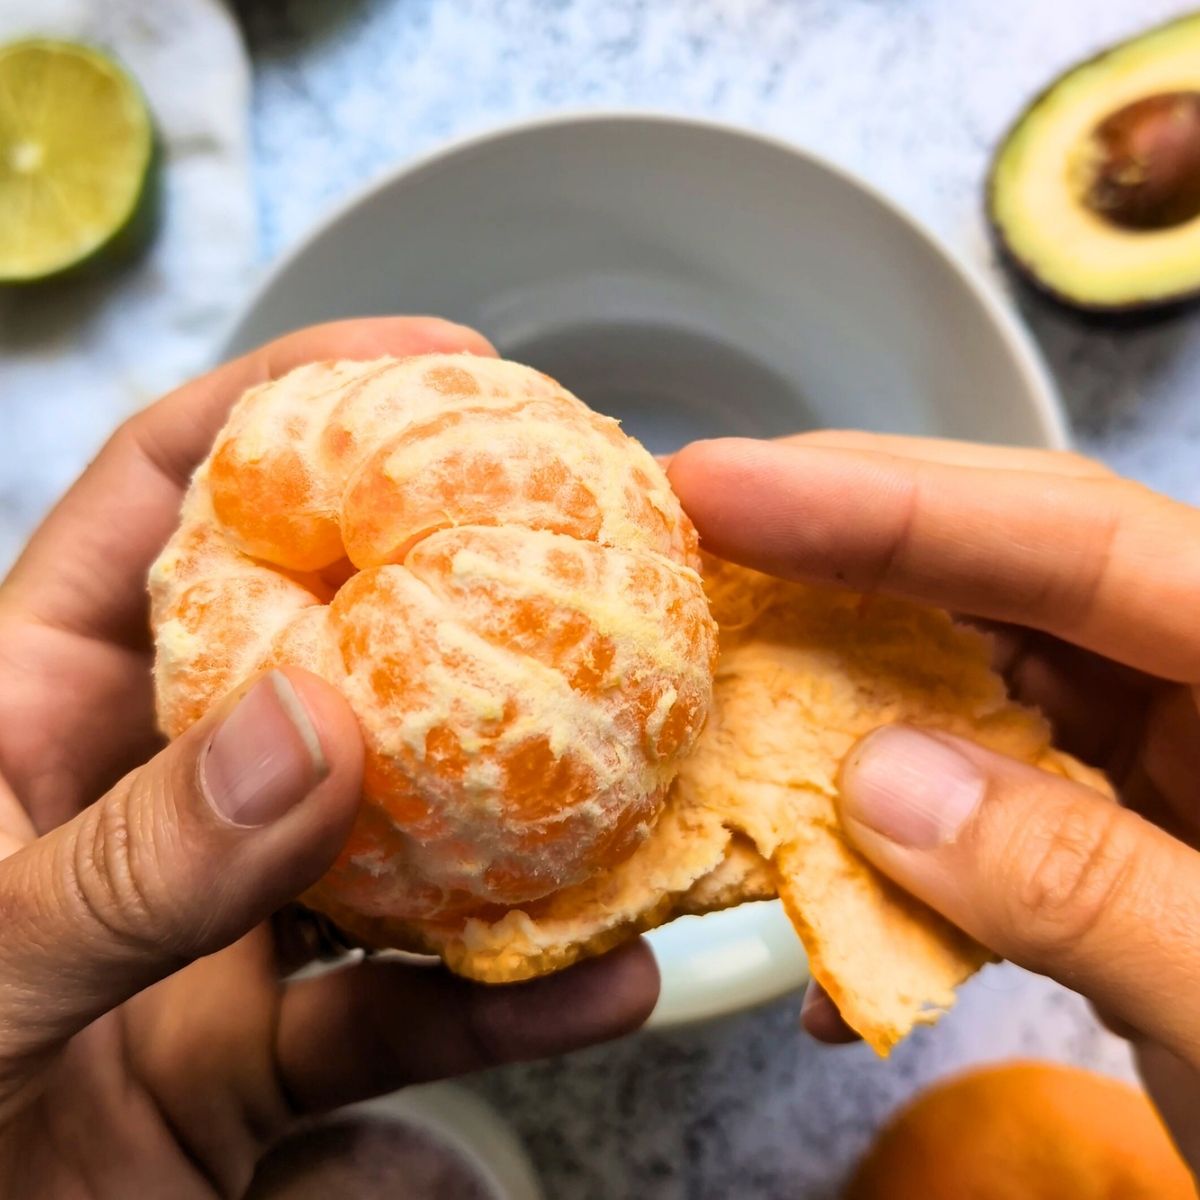 hands peeling an orange and adding the segments to a bowl.